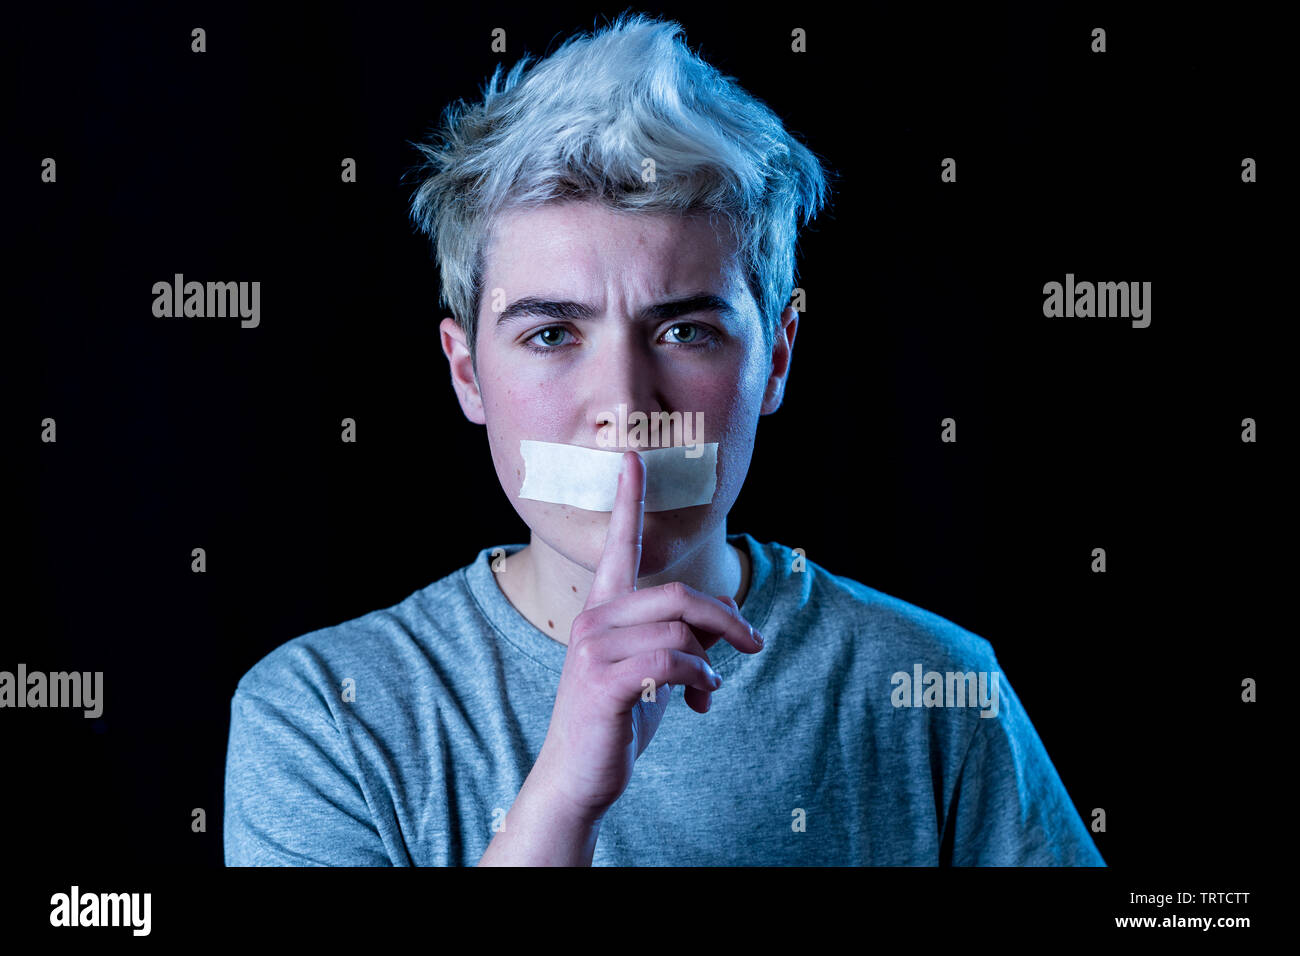 Attractive scared transgender boy with taped mouth in silence not able to talk about his gender identity In Censorship Taboo and intolerance Concept. Stock Photo